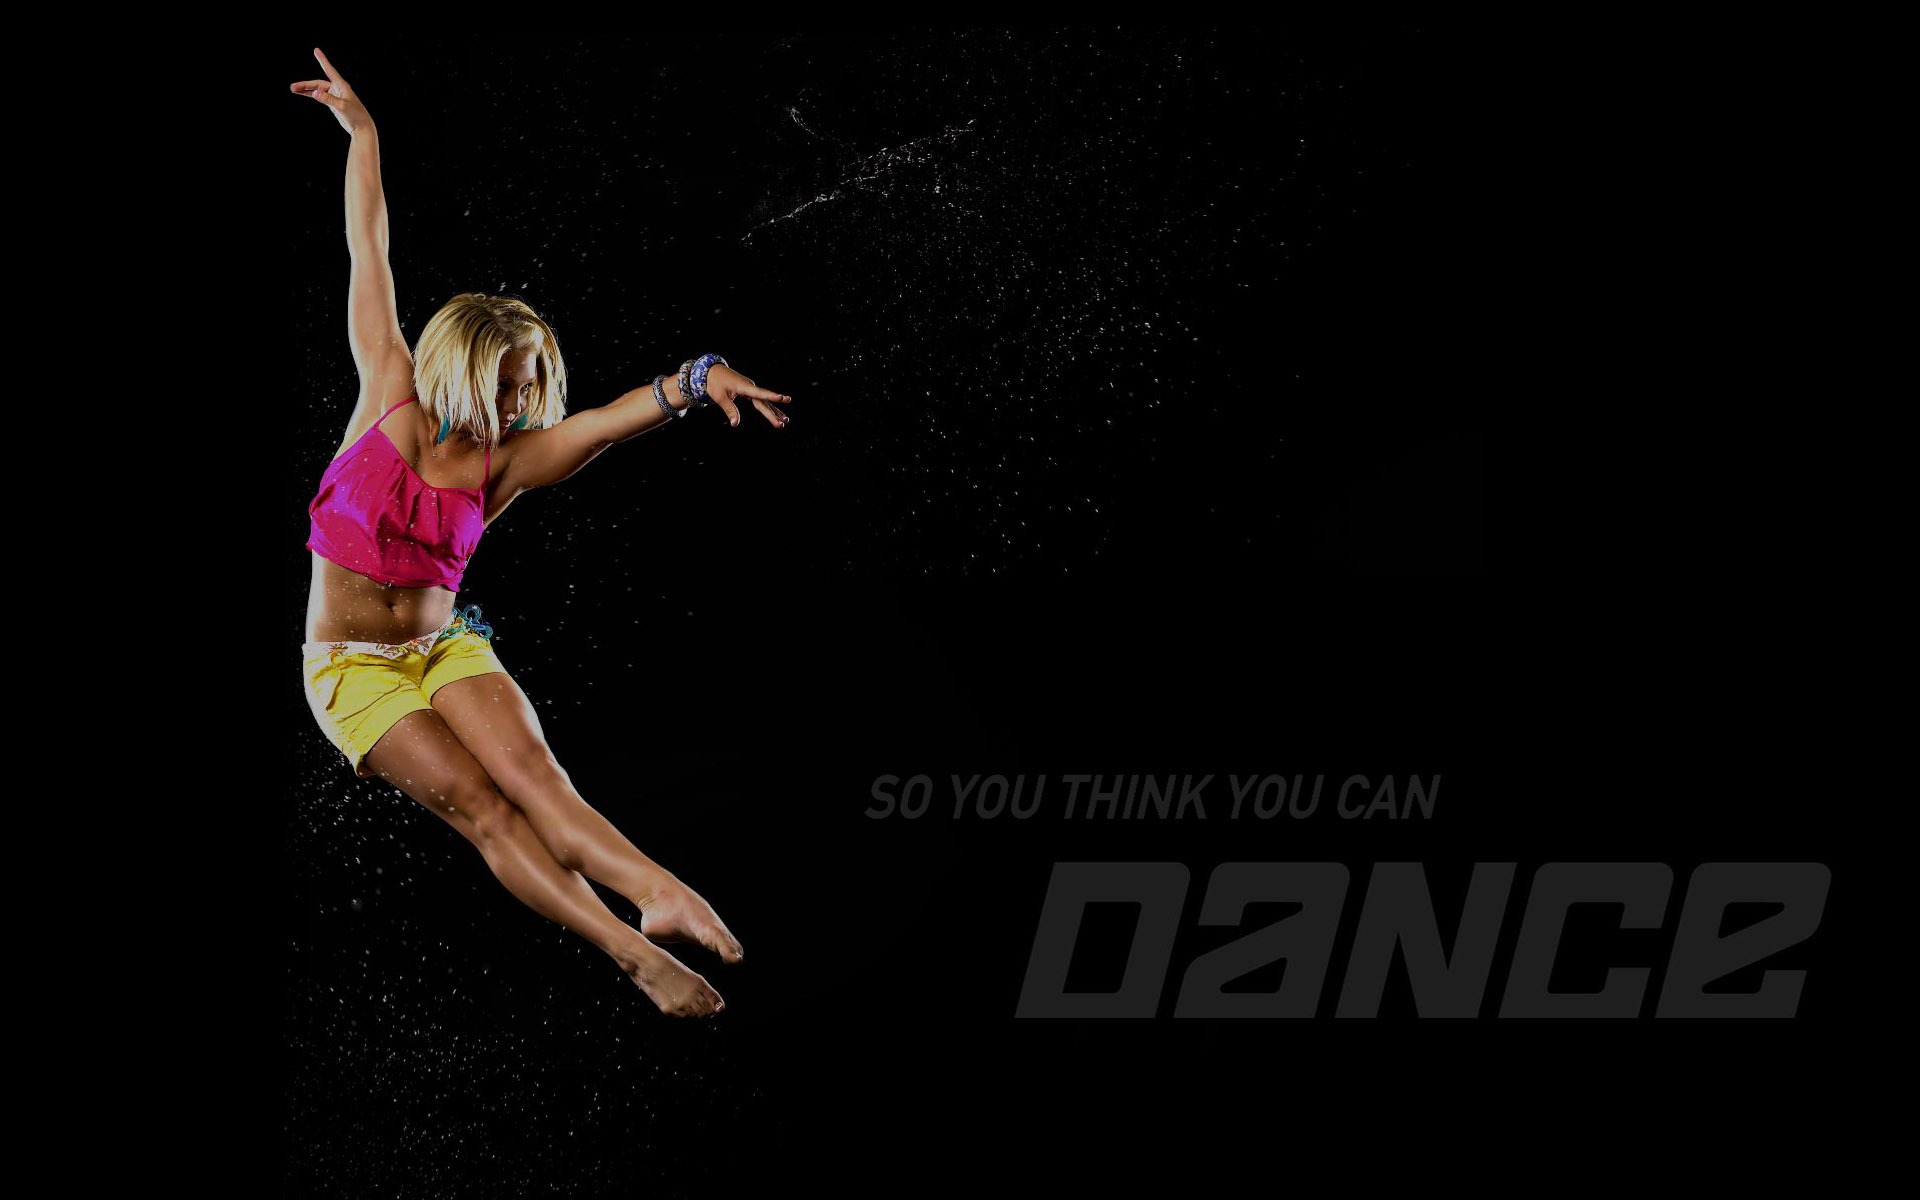 So You Think You Can Dance 舞林争霸 壁纸(一)5 - 1920x1200